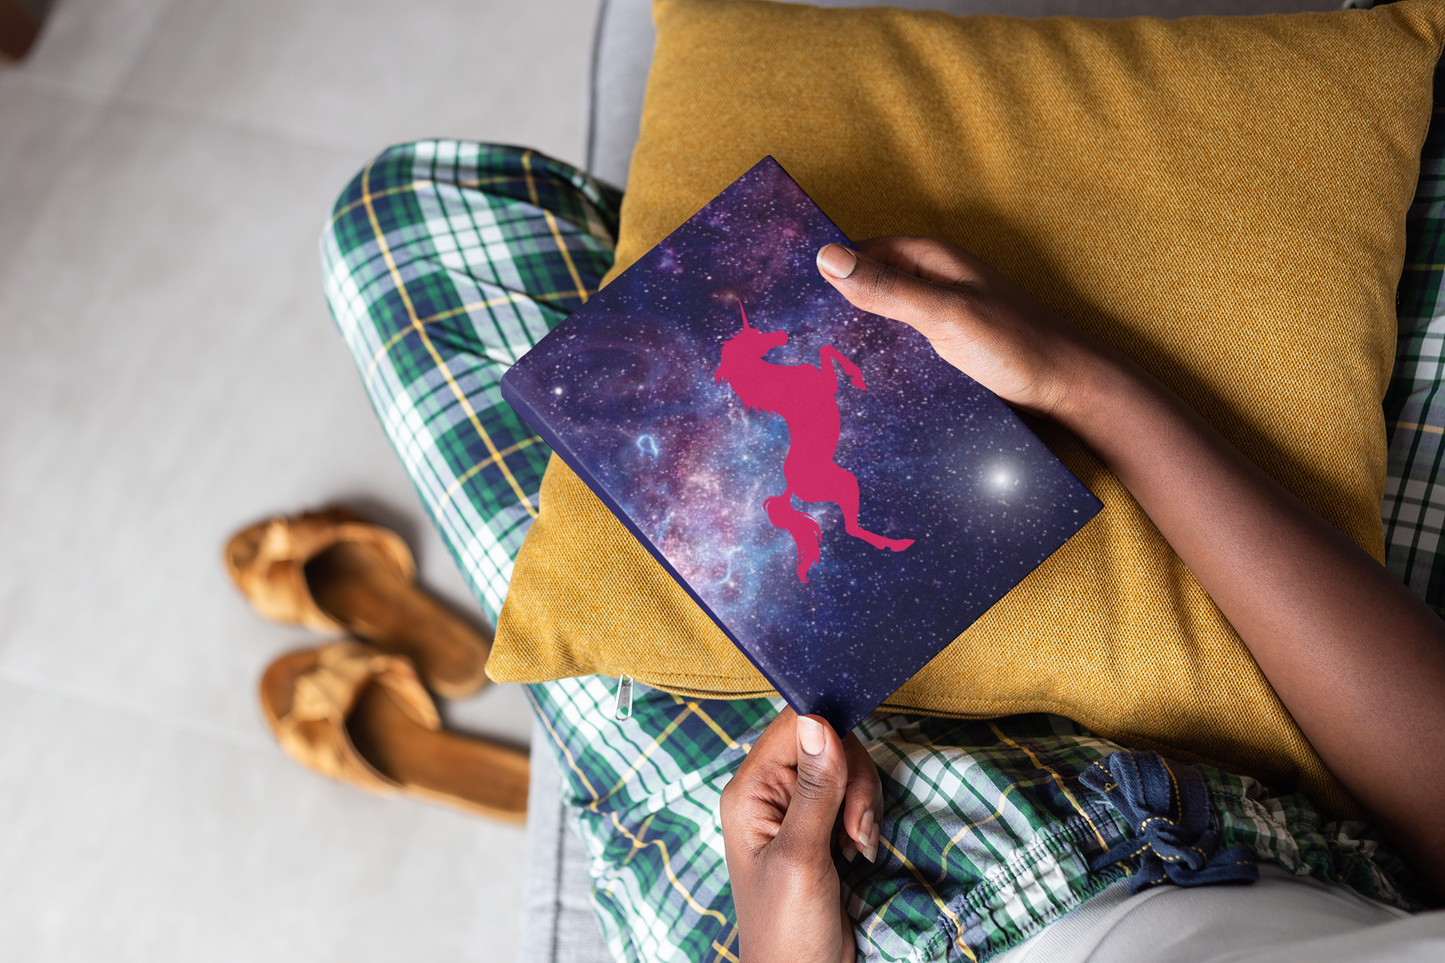 Cosmic Unicorn Chronicles Hardcover Notebook Journal Matte | Cosmic Themed Journal | Unicorn in Galaxies Diary | Stars in the Universe Notepad